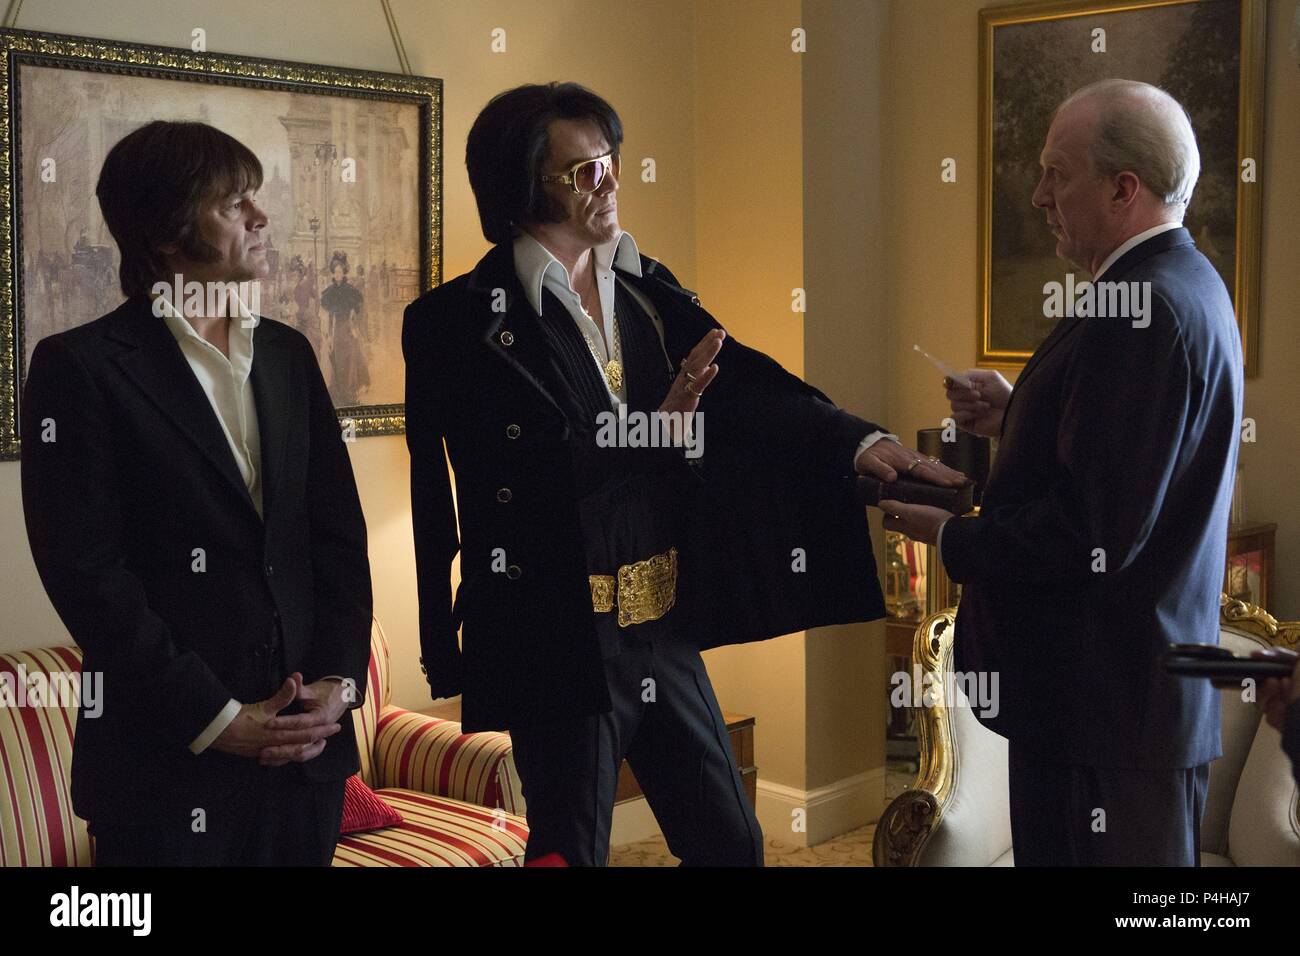 Original Film Title: ELVIS AND NIXON.  English Title: ELVIS AND NIXON.  Film Director: CARY ELWES.  Year: 2016.  Stars: JOHNNY KNOXVILLE; MICHAEL SHANNON; TRACY LETTS. Credit: BENAROYA PICTURES/PICK UP TRUCK PICTURES / Album Stock Photo